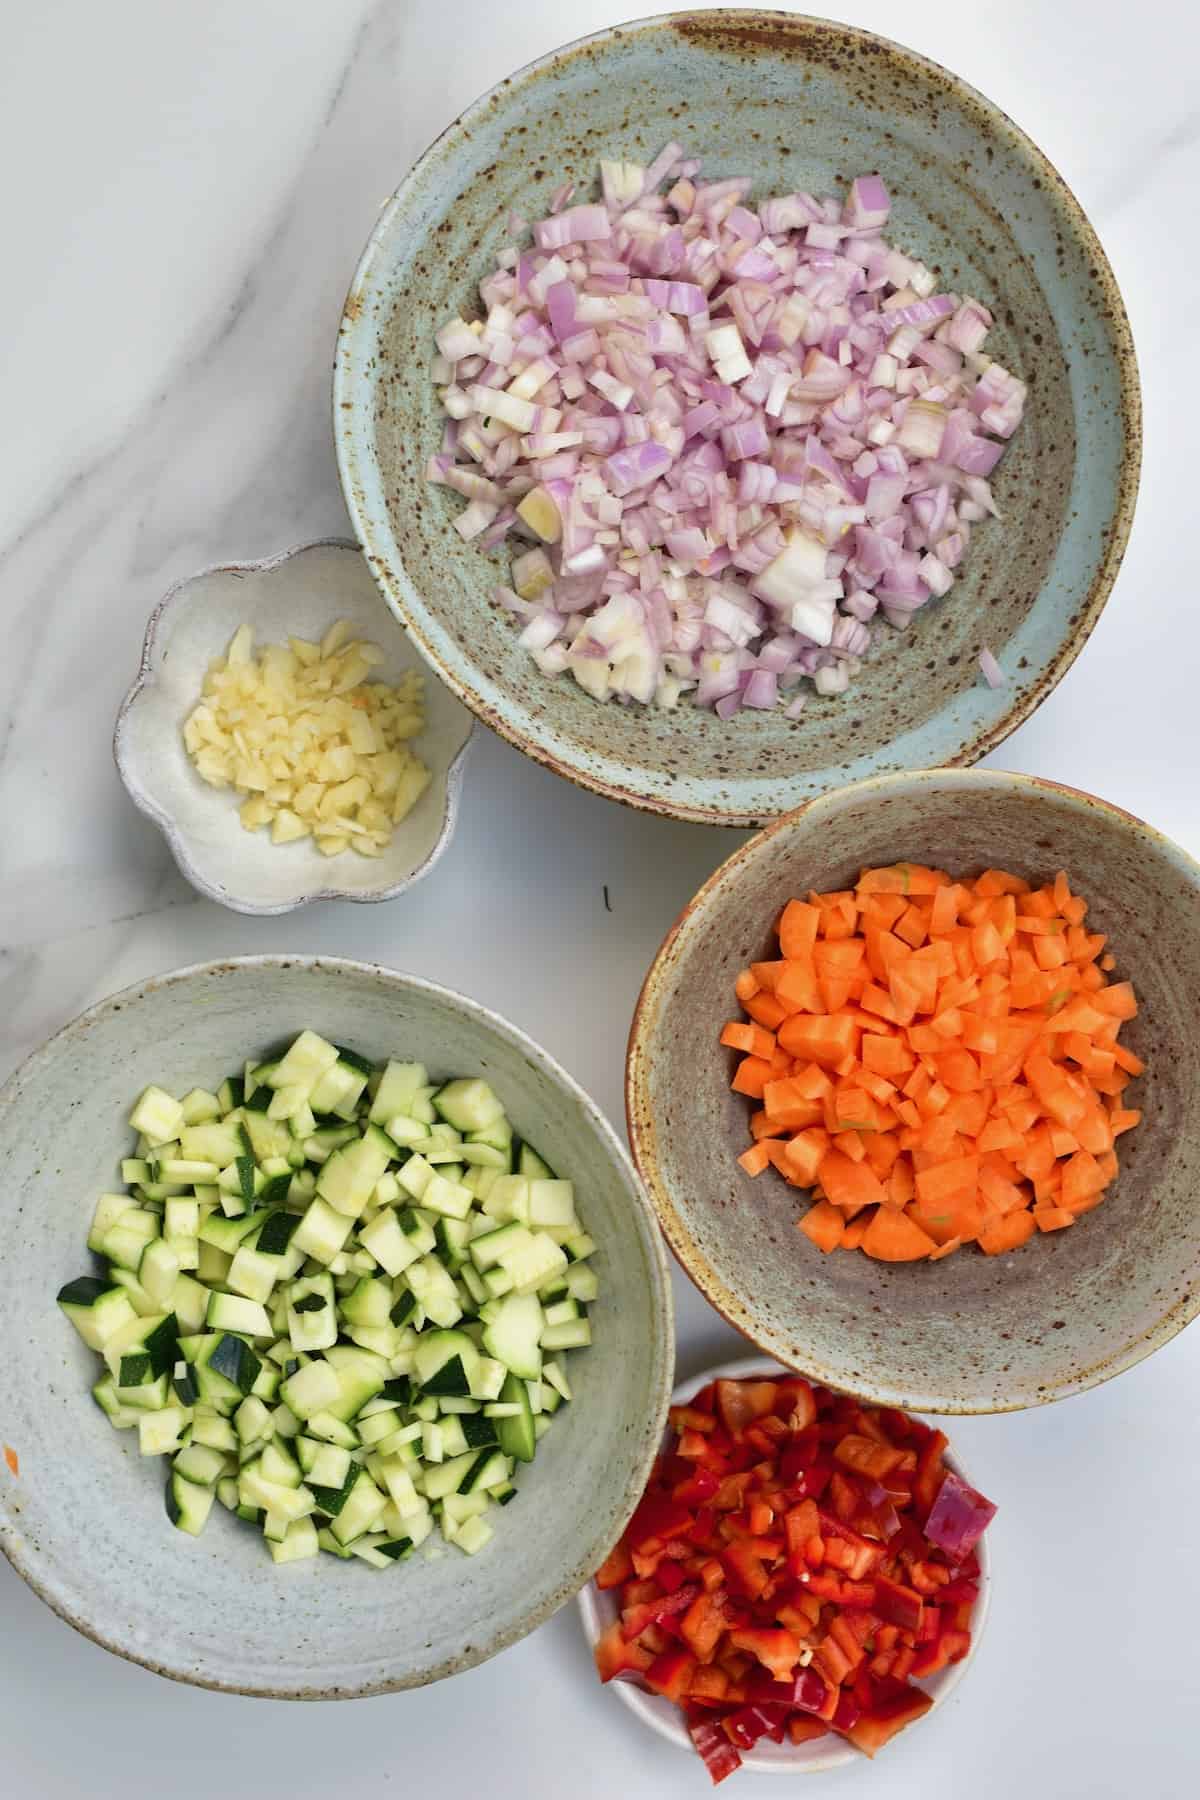 Chopped vegetables in separate bowls